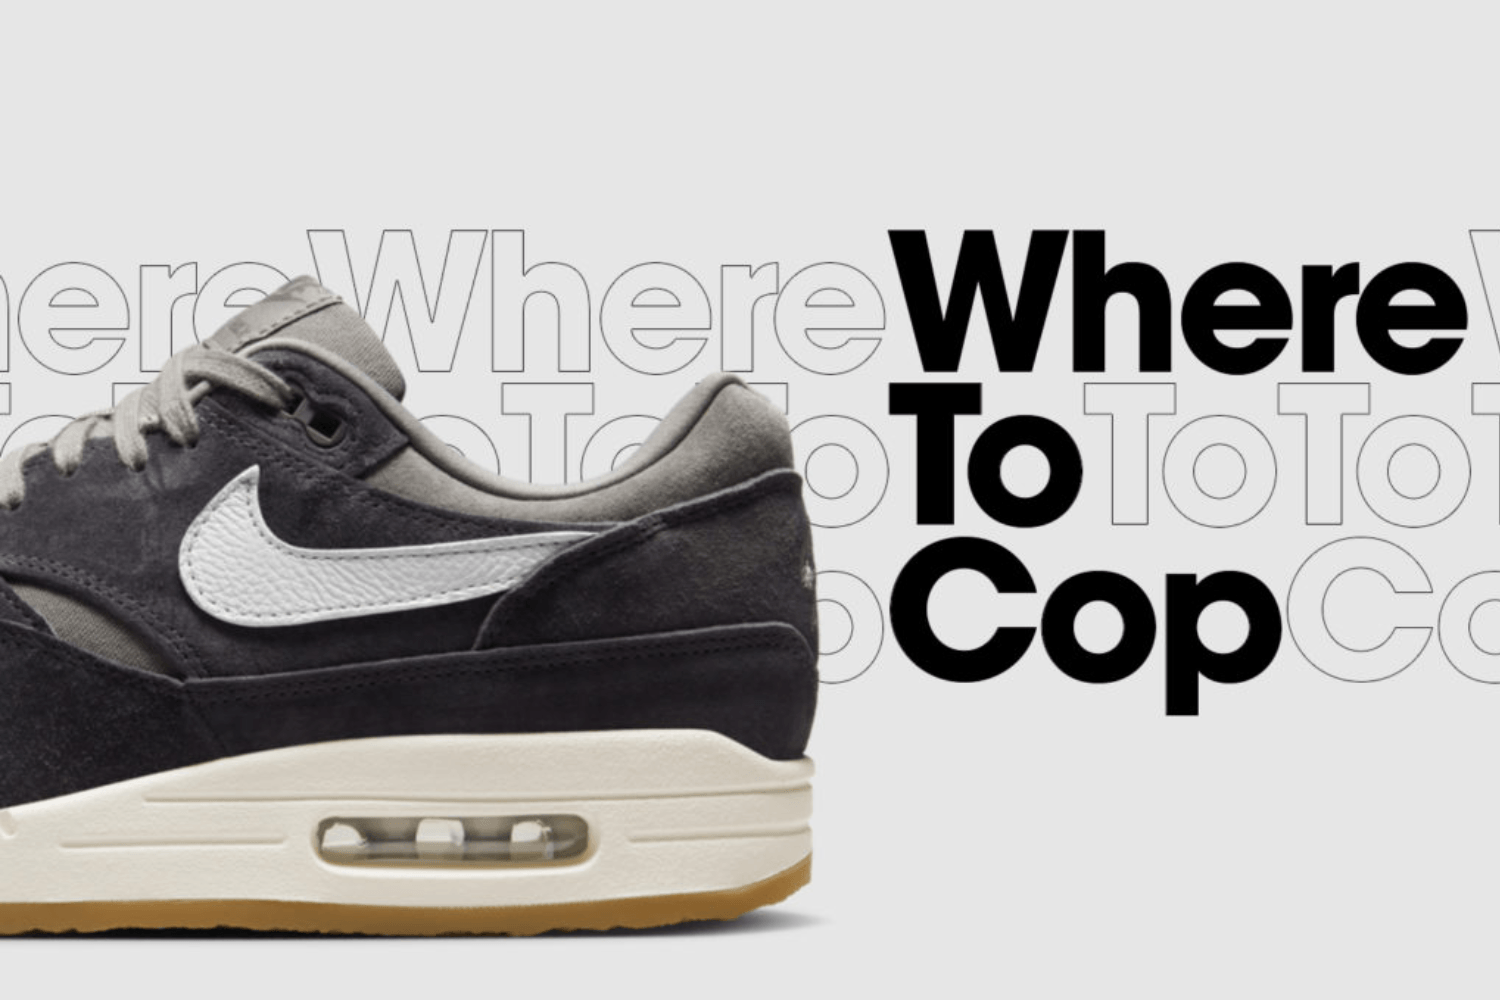 Where to cop: Nike Air Max 1 Crepe 'Soft Grey'